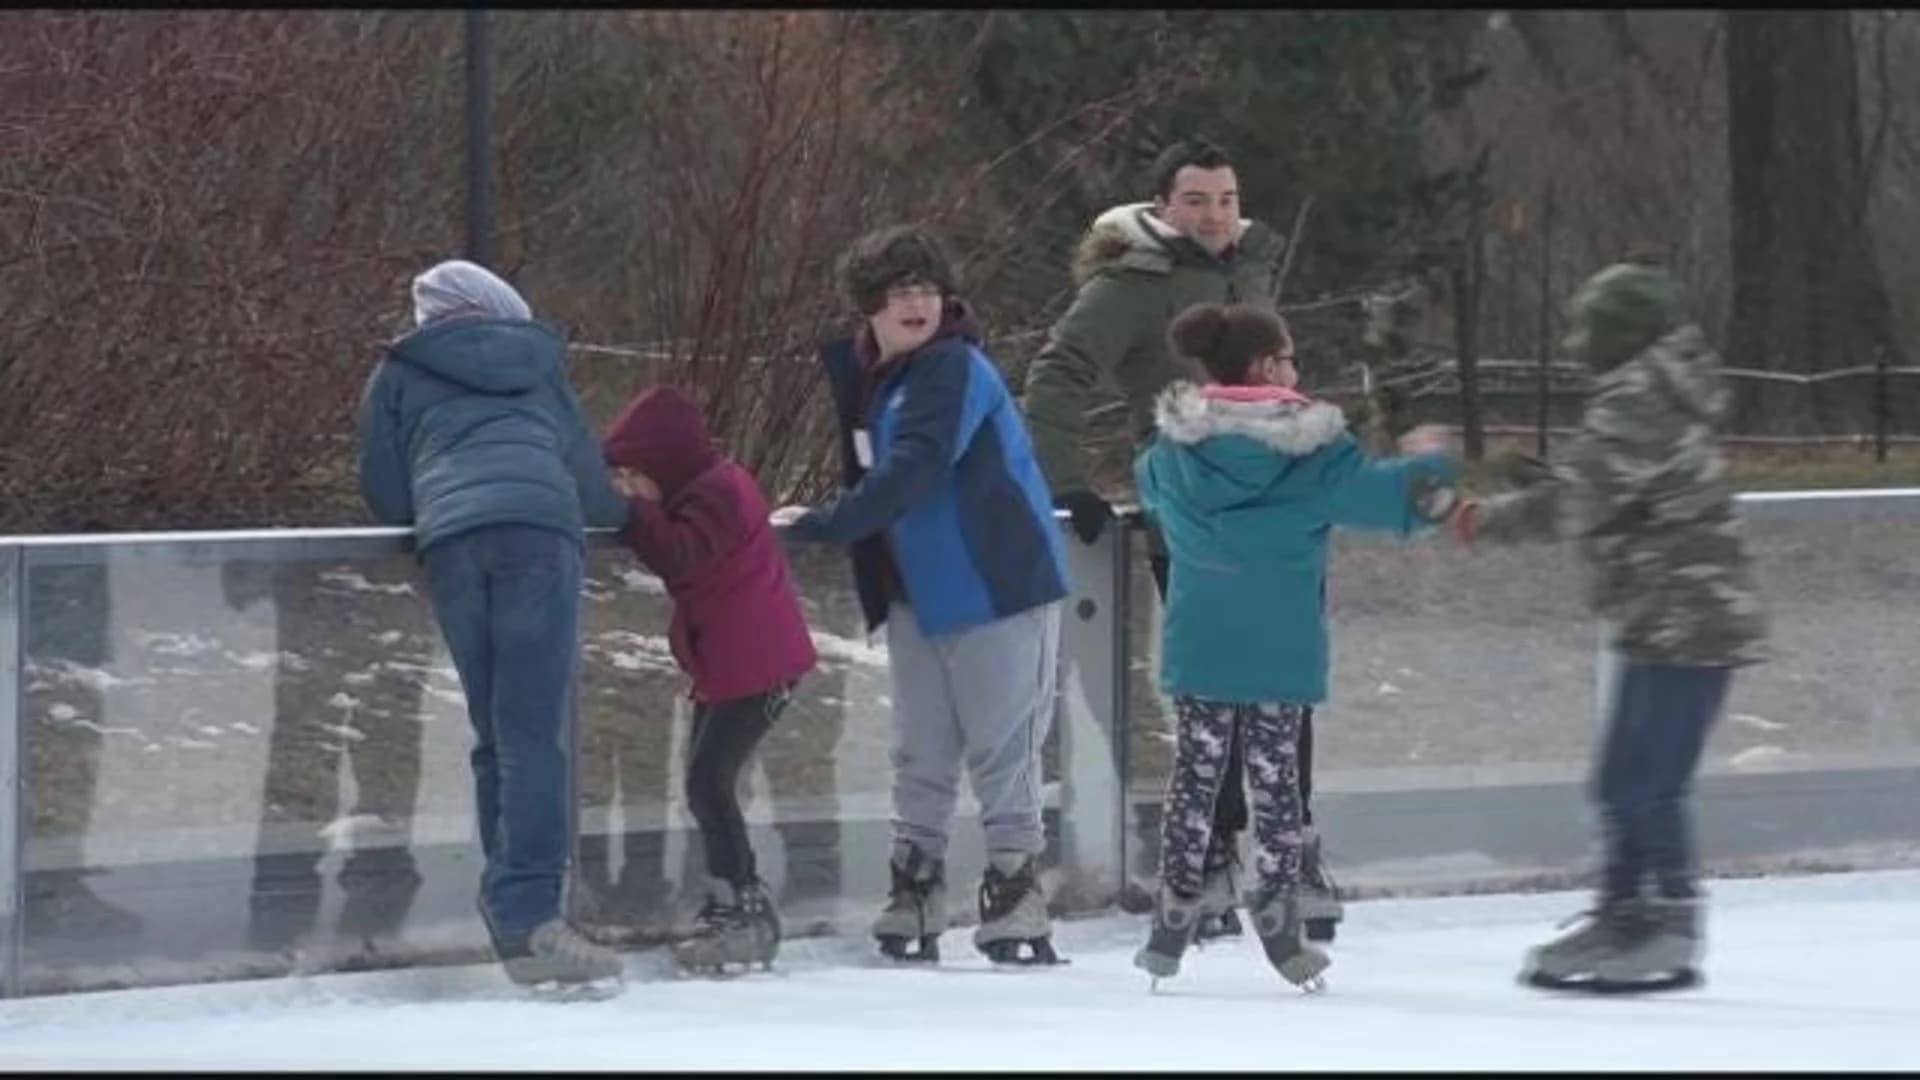 More than 600 children skate, sip hot chocolate on annual Skate Day